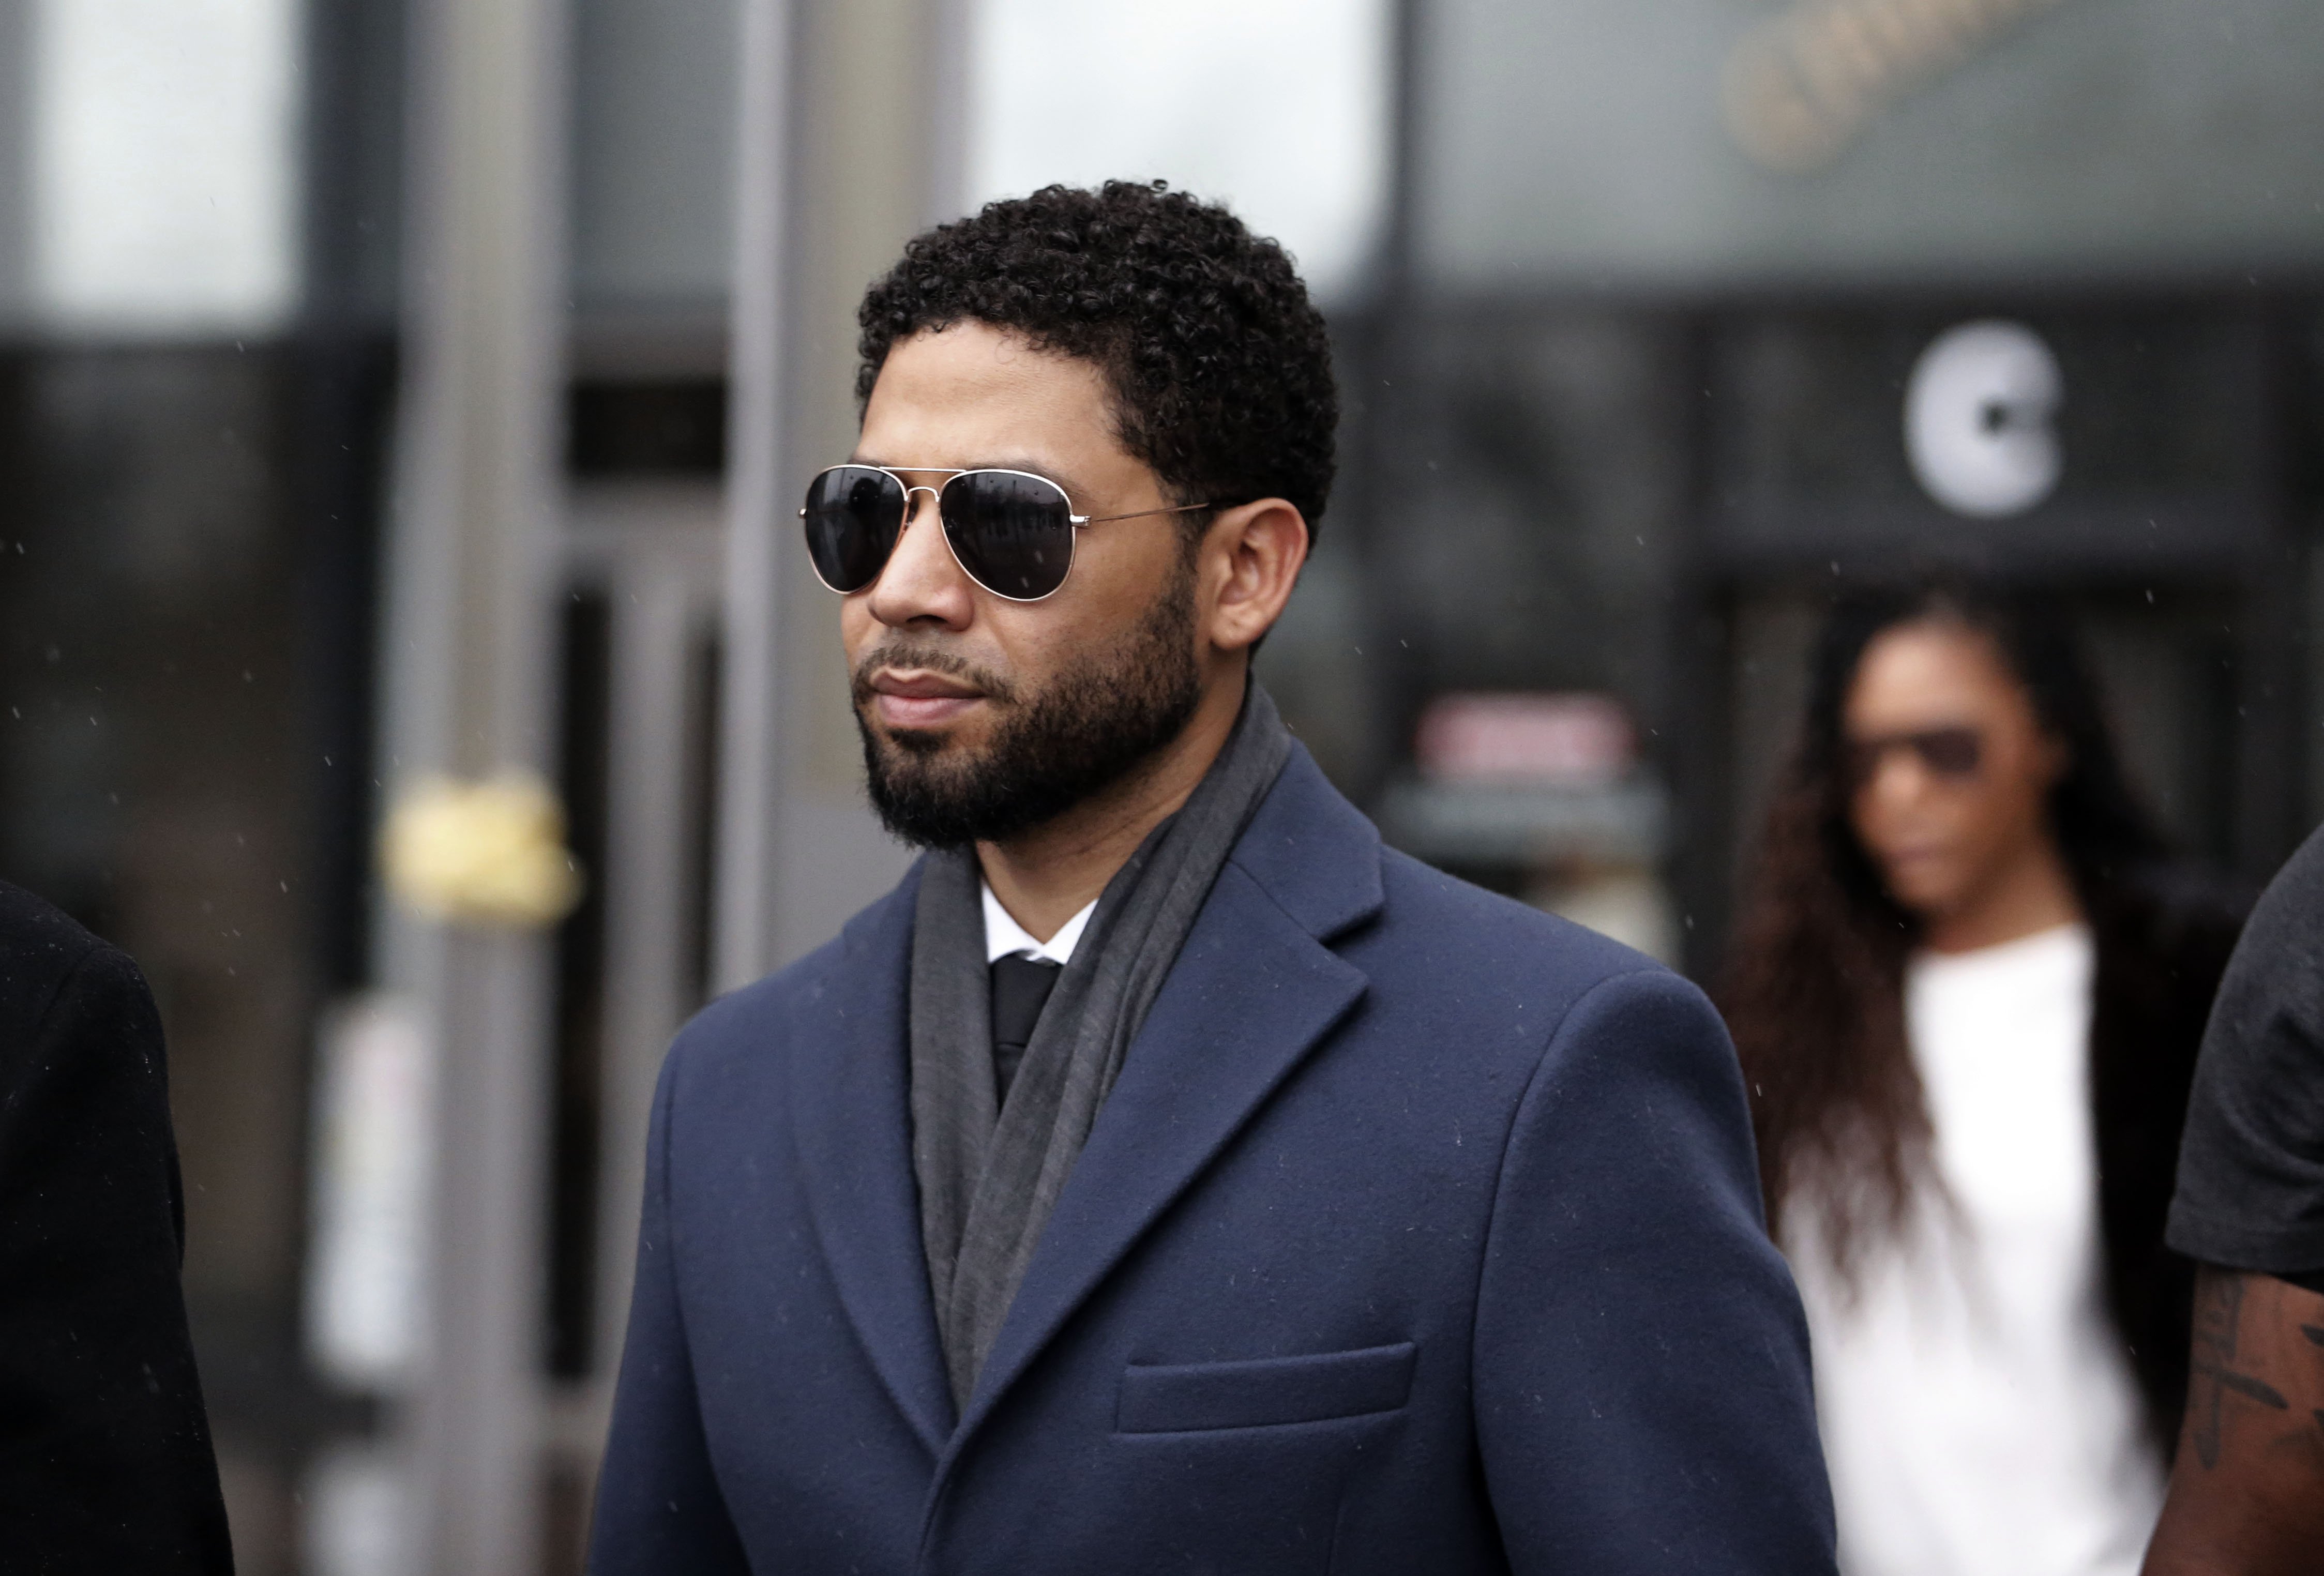 Jussie Smollett leaves Leighton Criminal Courthouse after his court appearance on March 14, 2019 in Chicago, Illinois. | Photo: Getty Images